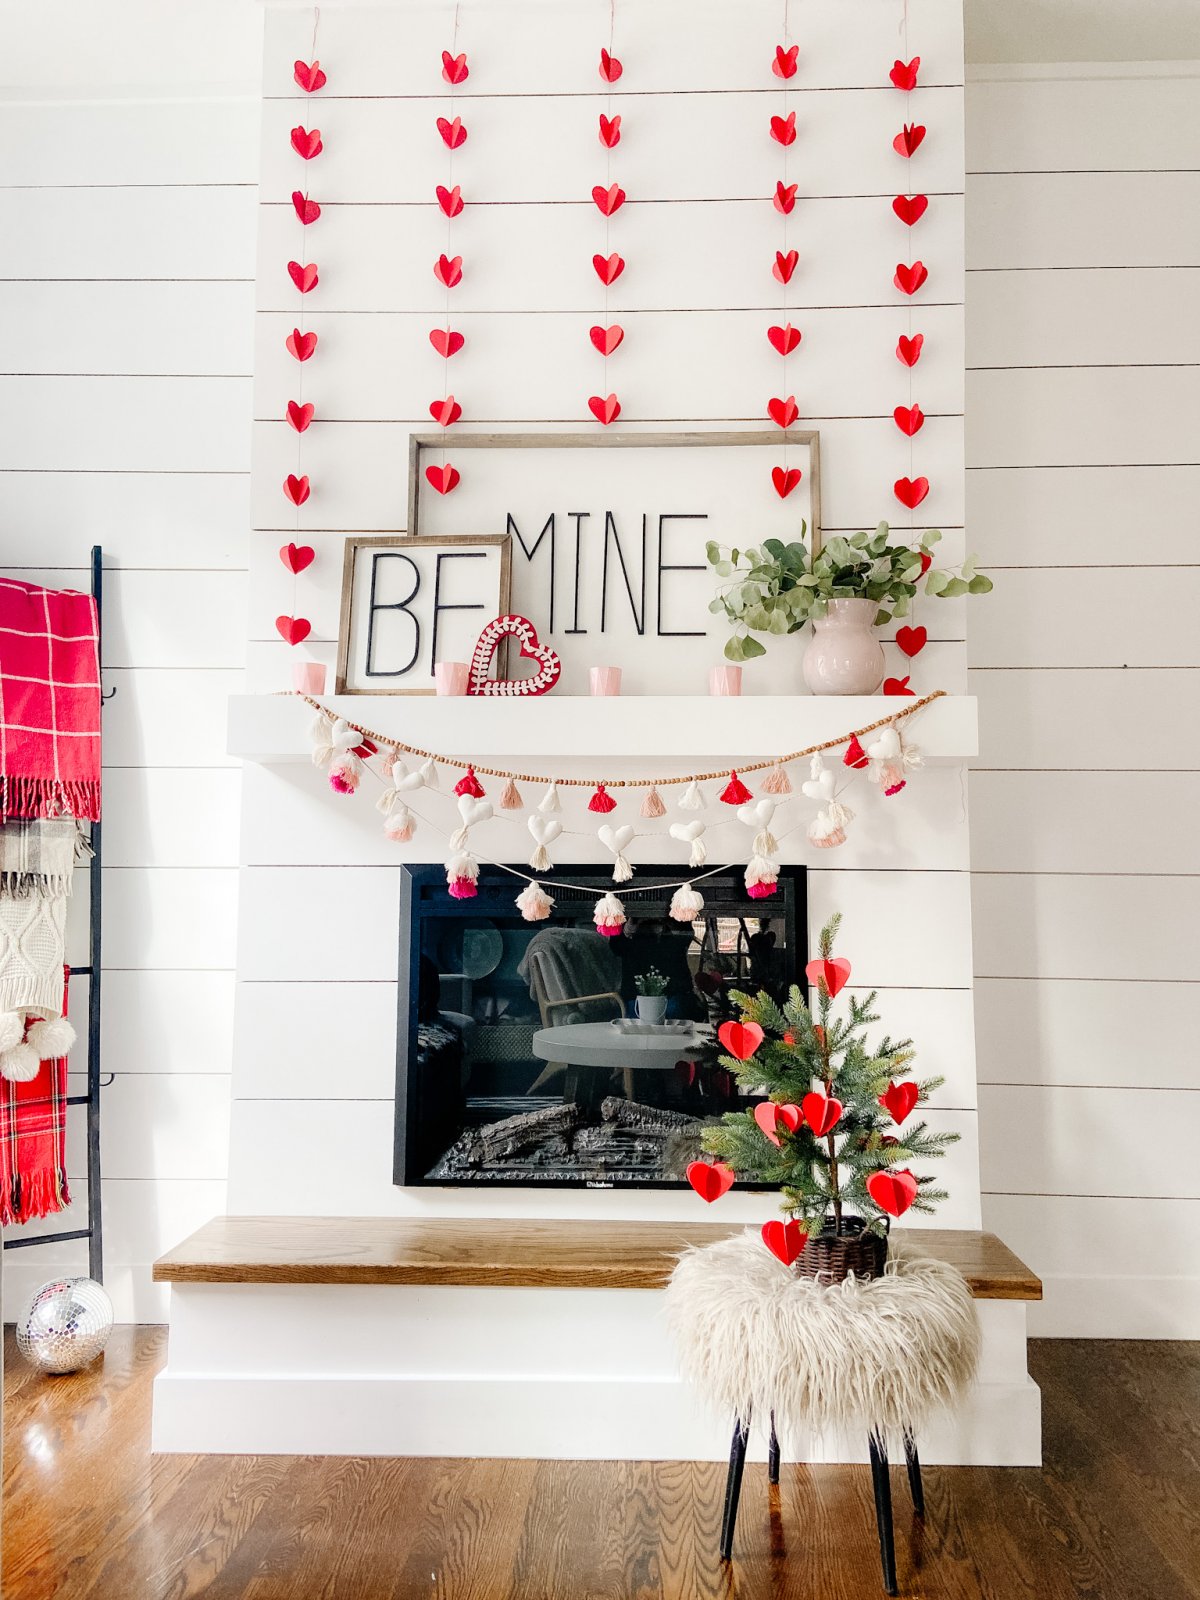 Be Mine Valentine Mantel Ideas. Create some DIY Valentine’s signs, hang festive banners two ways and add hearts to a tree for colorful Valentine’s Day decor!